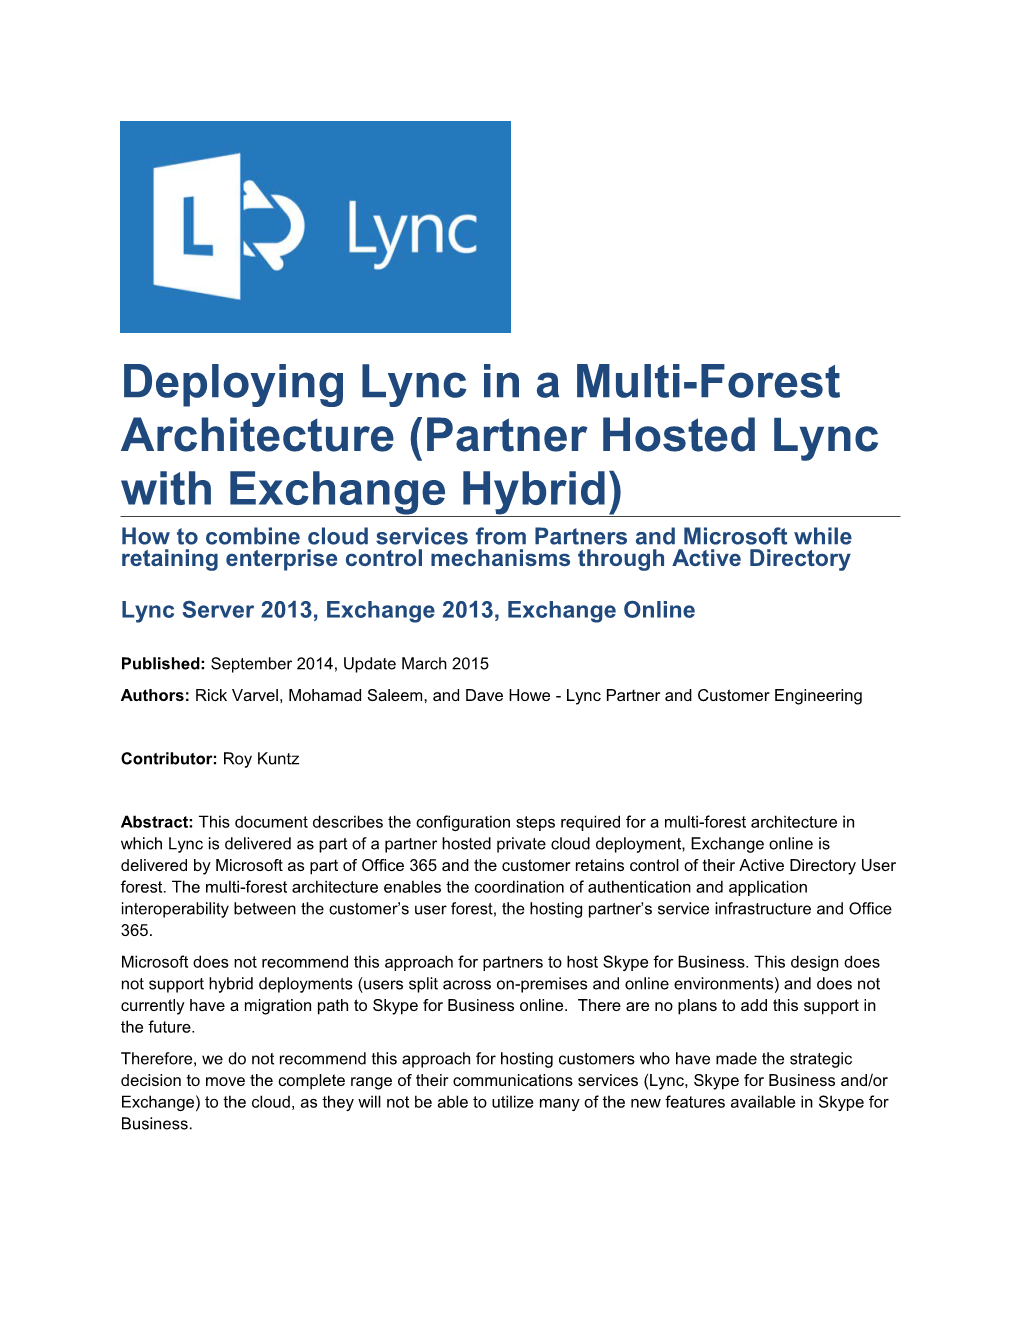 Deploying Lync in a Multi-Forest Architecture (Partner Hosted Lync with Exchange Hybrid)